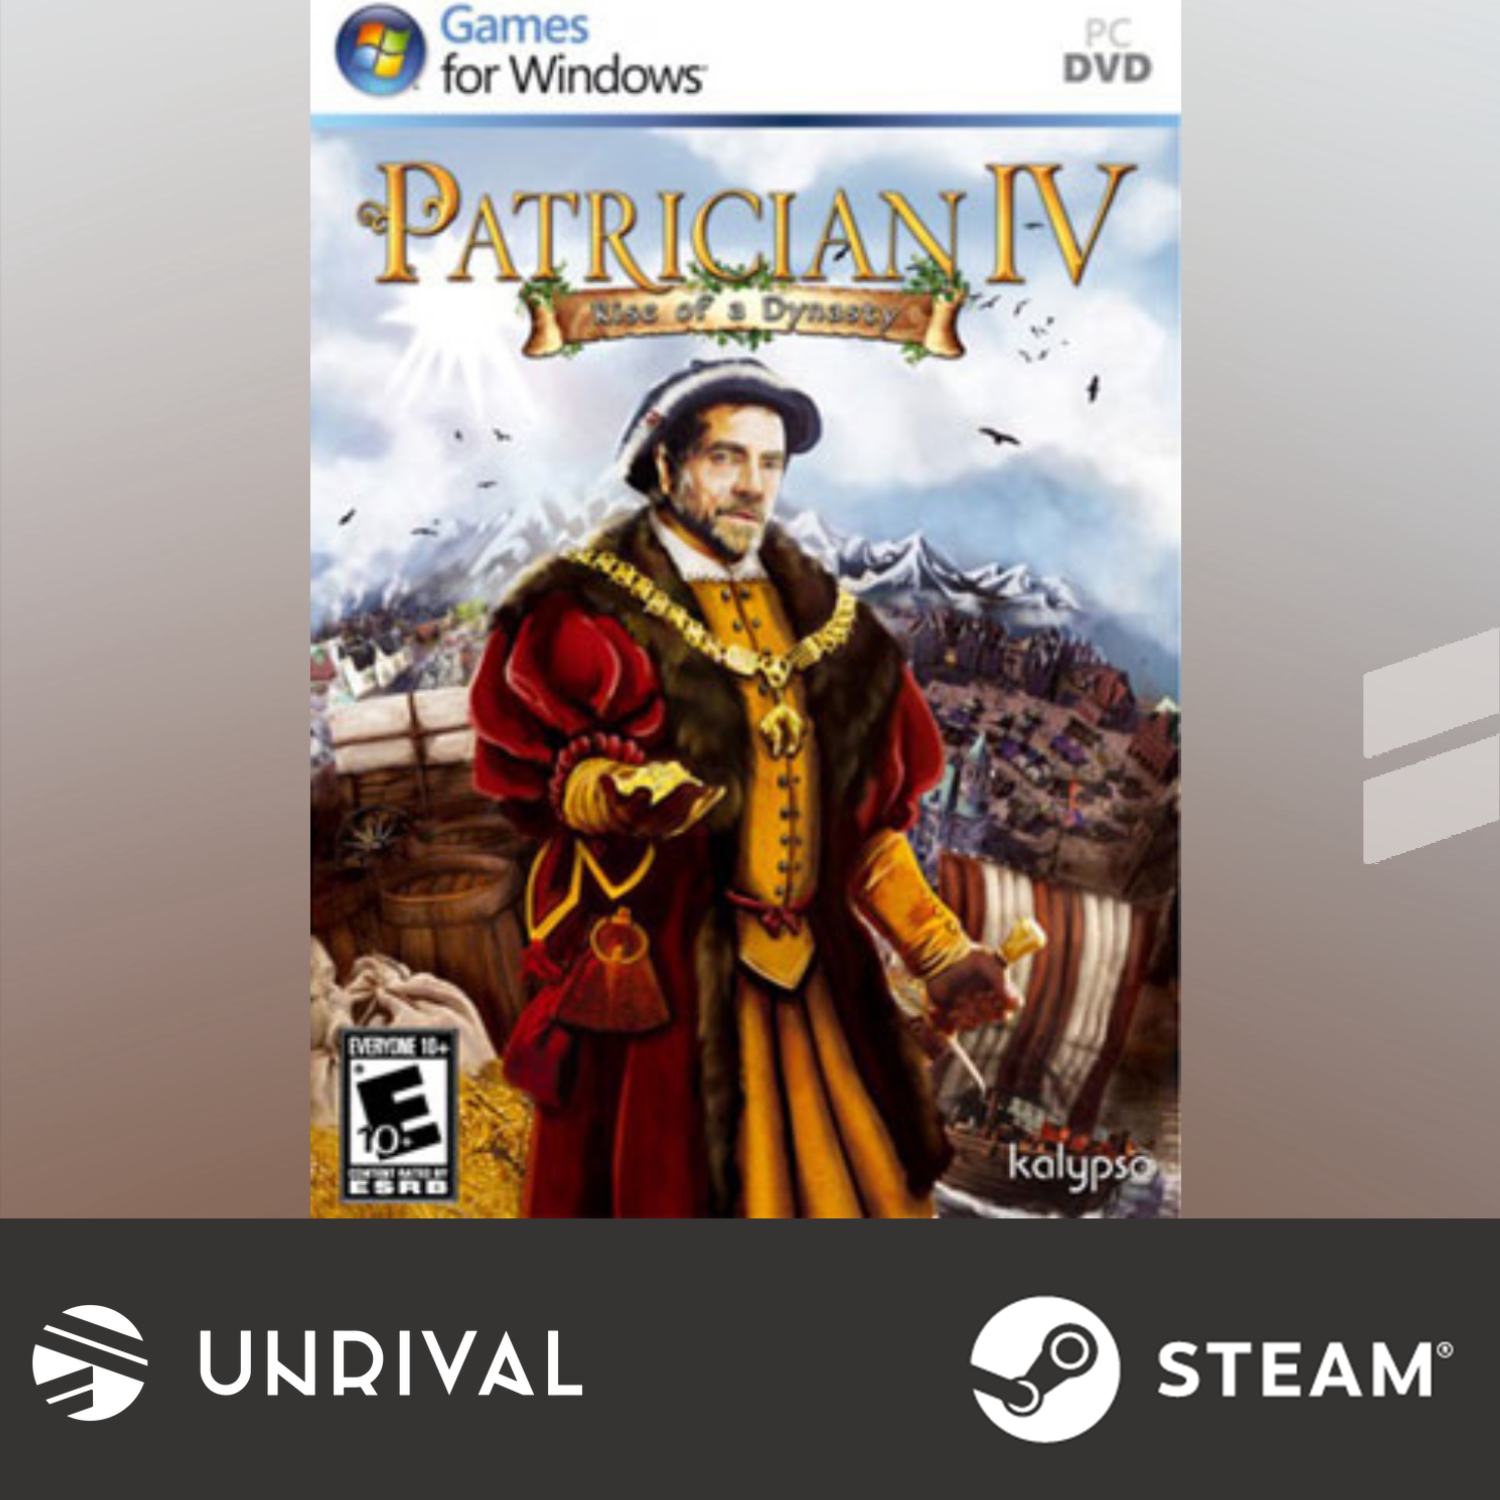 Patrician IV: Rise of a Dynasty PC Digital Download Game - Unrival